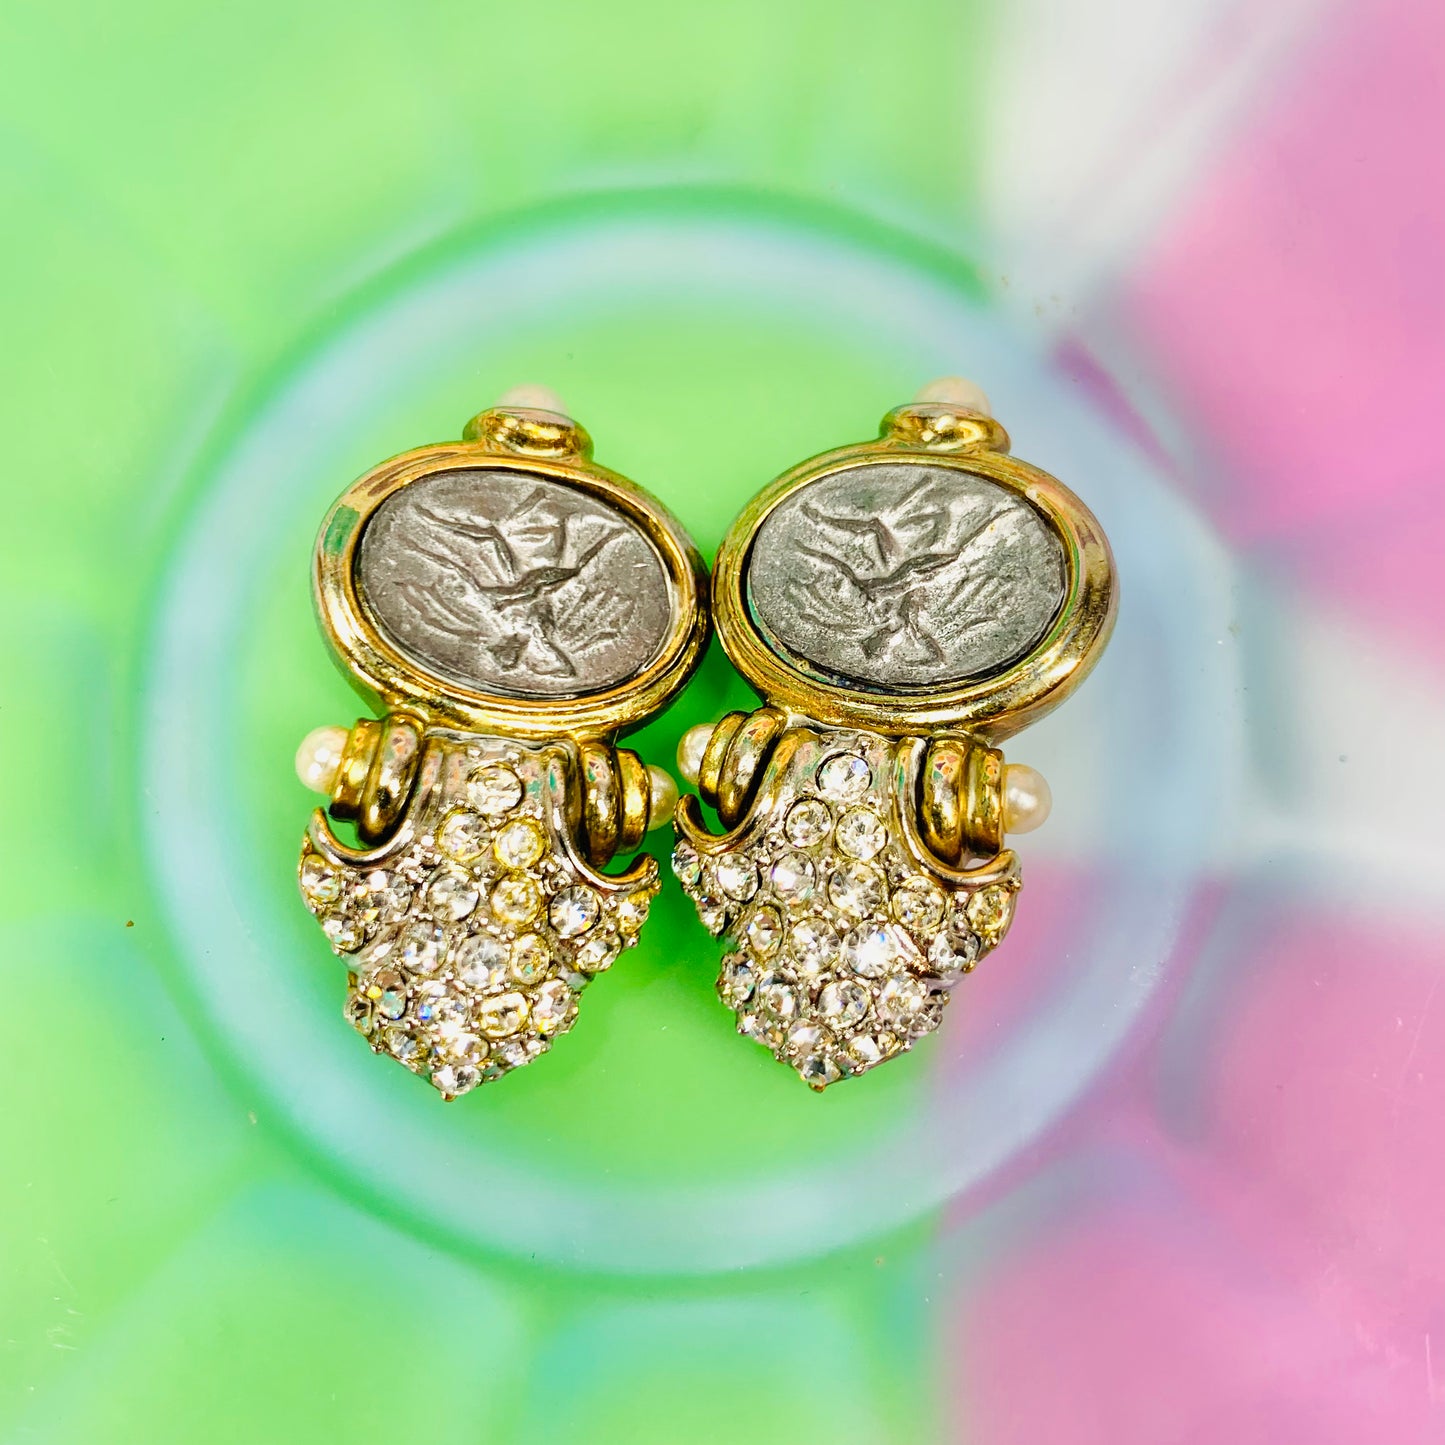 1950s gold plated cameo drop earrings with pearls